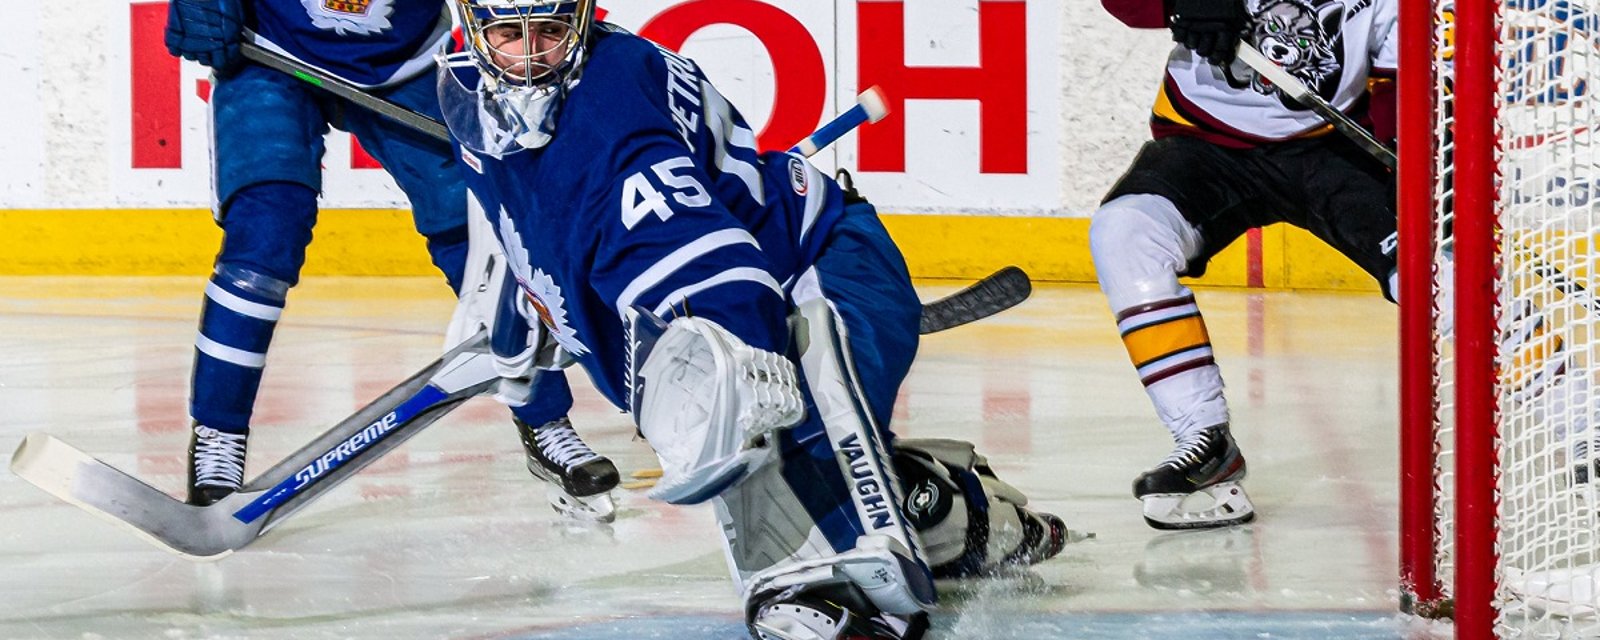 Maple Leafs forced to sign new goalie due to injuries.